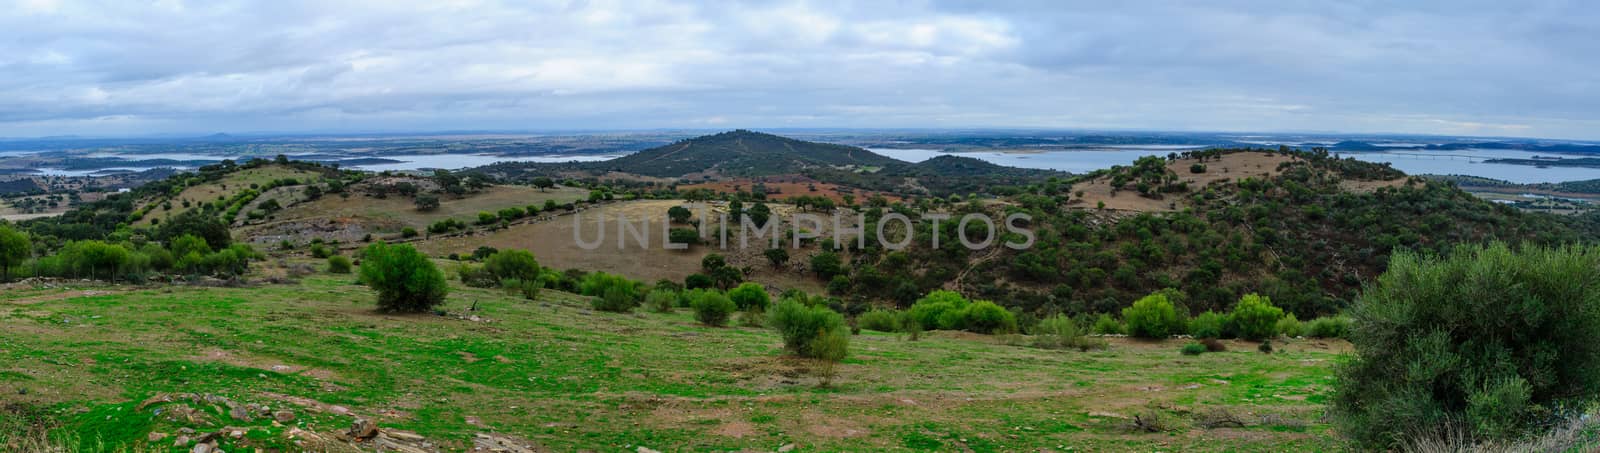 View over Alqueva Lake from Monsaraz by RnDmS